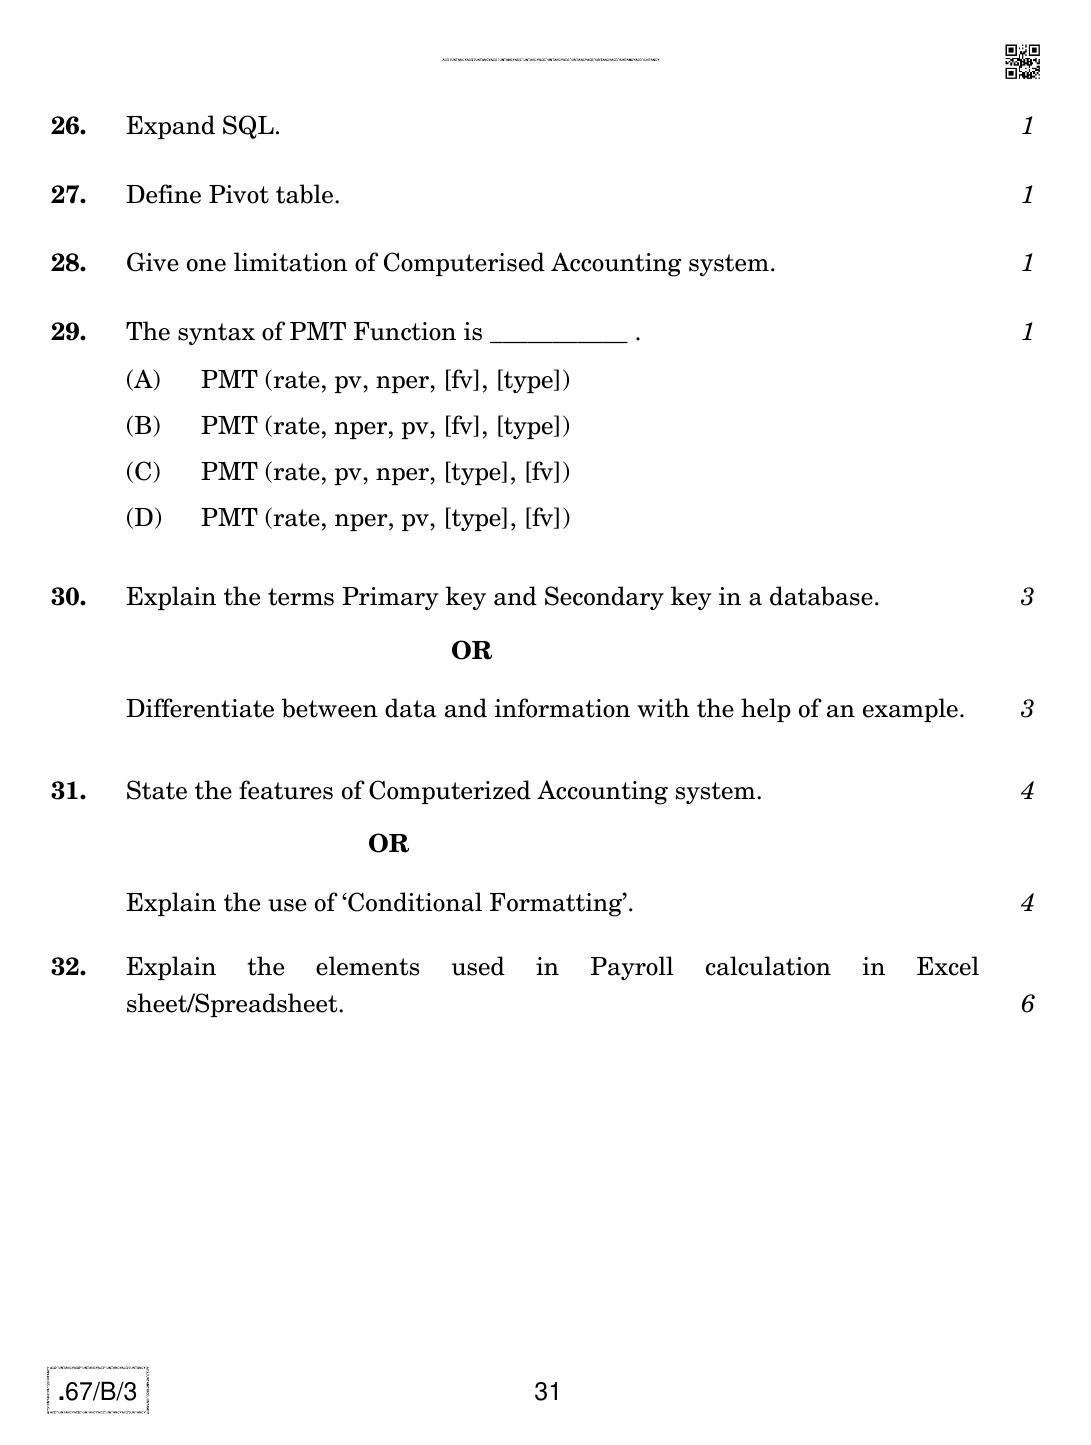 CBSE Class 12 67-C-3 - Accountancy 2020 Compartment Question Paper - Page 31